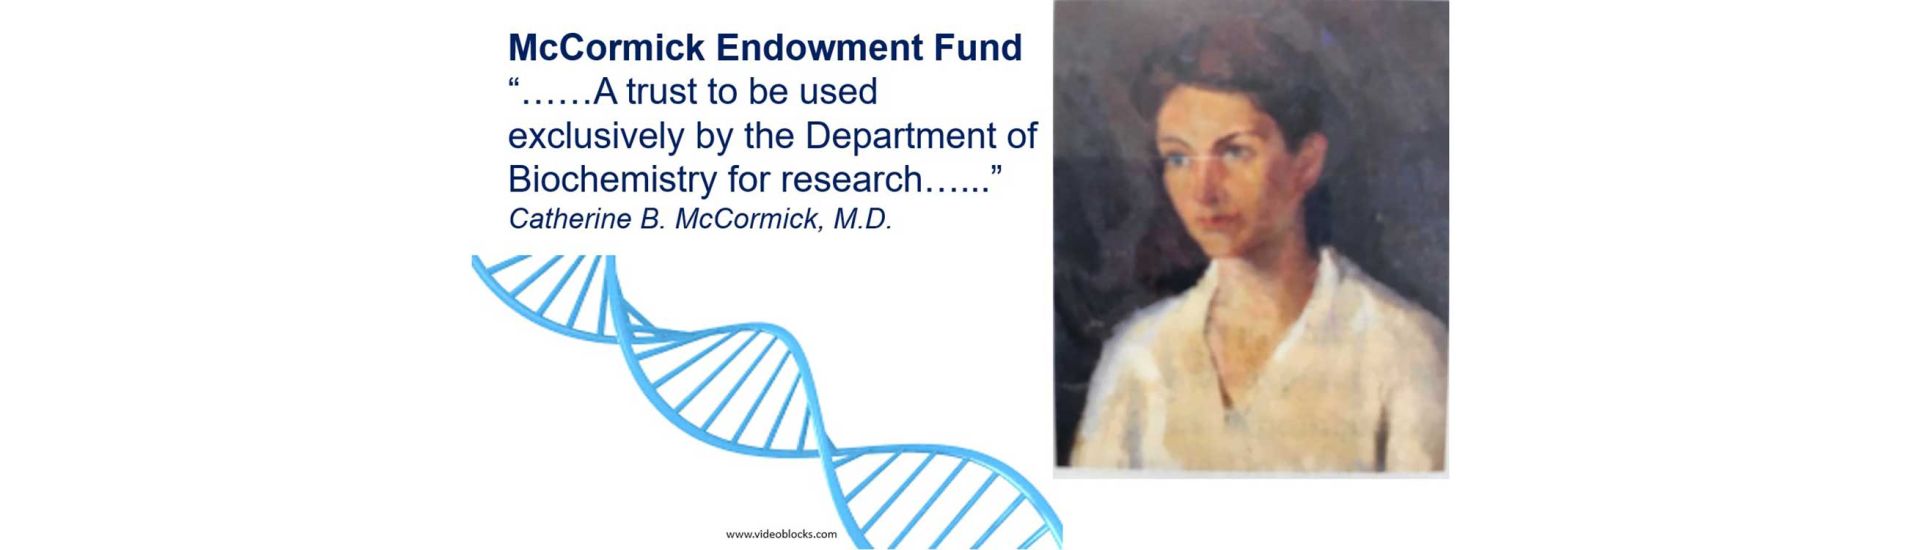 "McCormick Endowment Fund | A trust to be used exclusively by the Department of Biochemistry for research ... Catherine B. McCormick, MD" | Portrait of Catherine McCormick